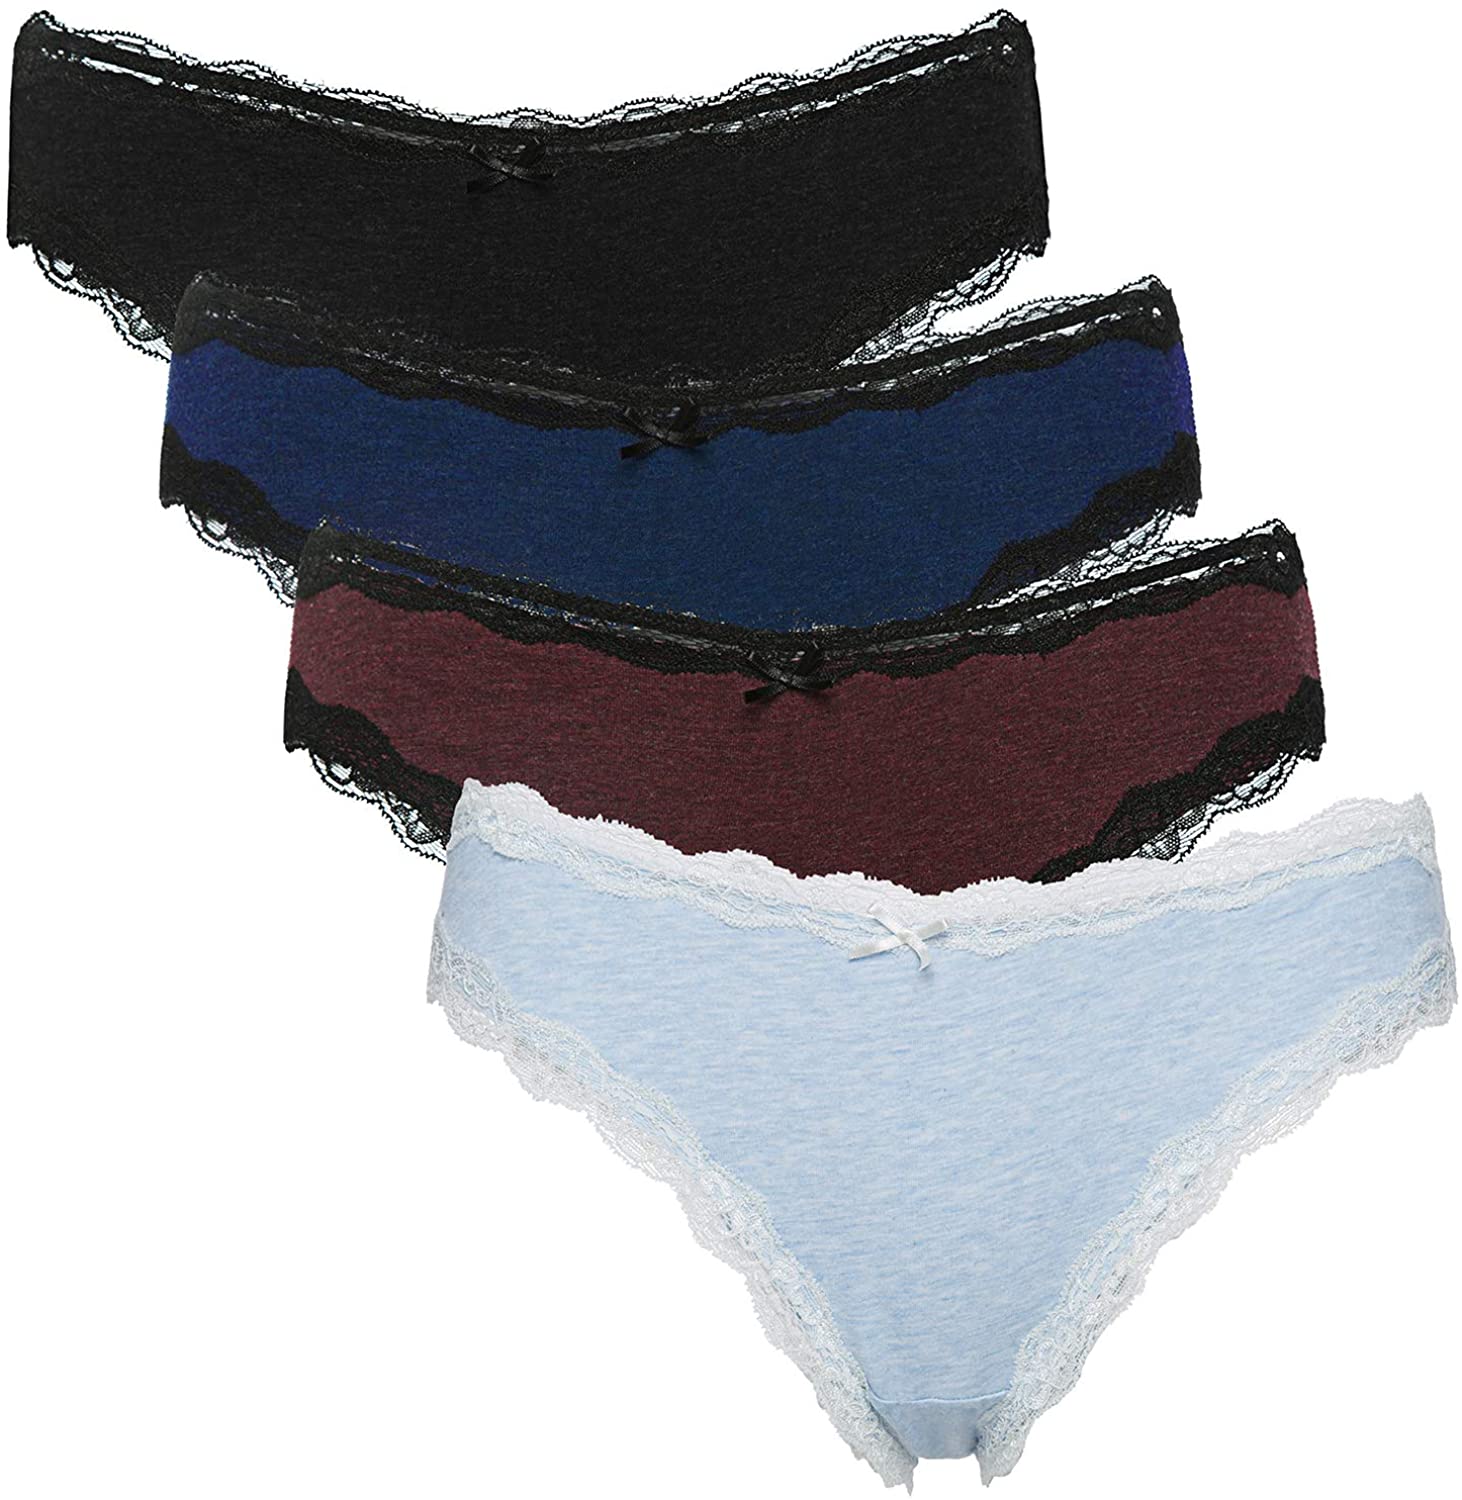 Price:$9.99 CharmLeaks Womens Cotton Underwear Hipster Panties Lace Trim Briefs Pack of 4 at Amazon Women’s Clothing store